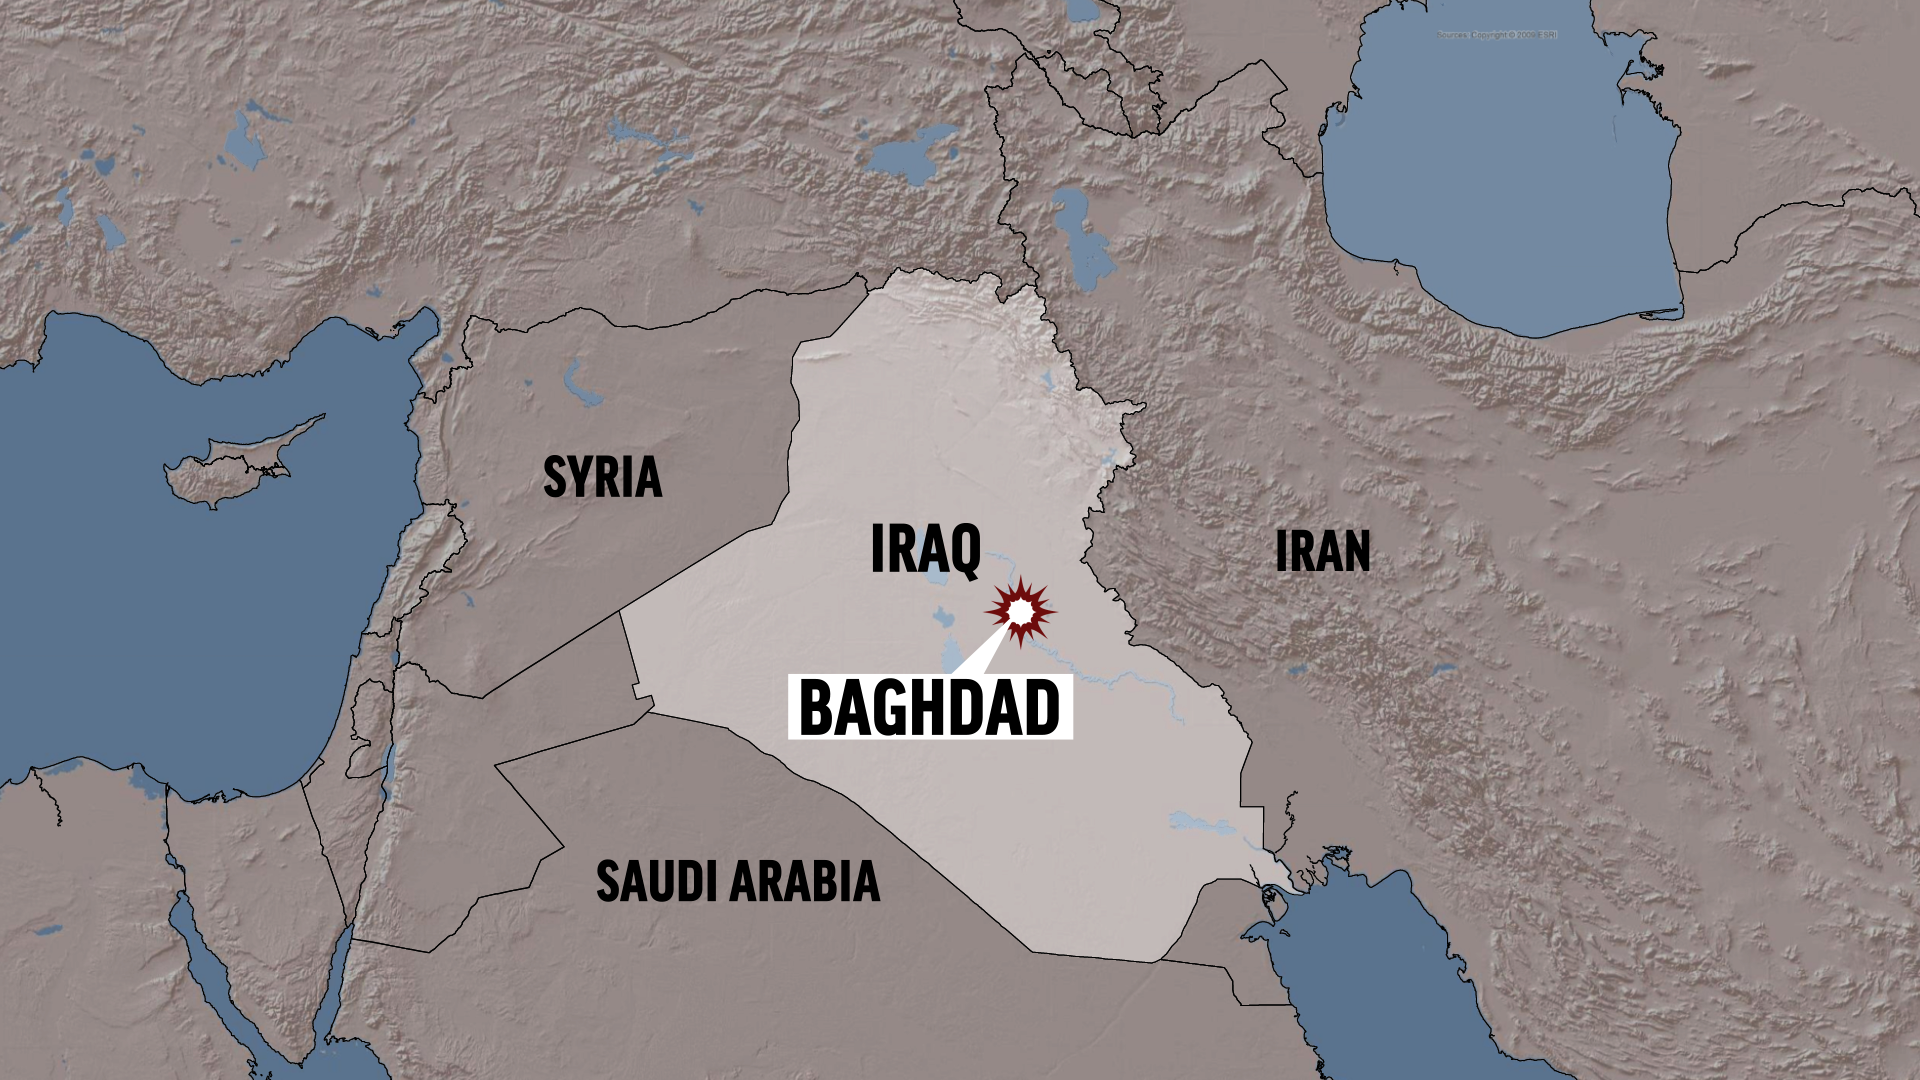 ISIS claims responsibility for car bombing in Baghdad